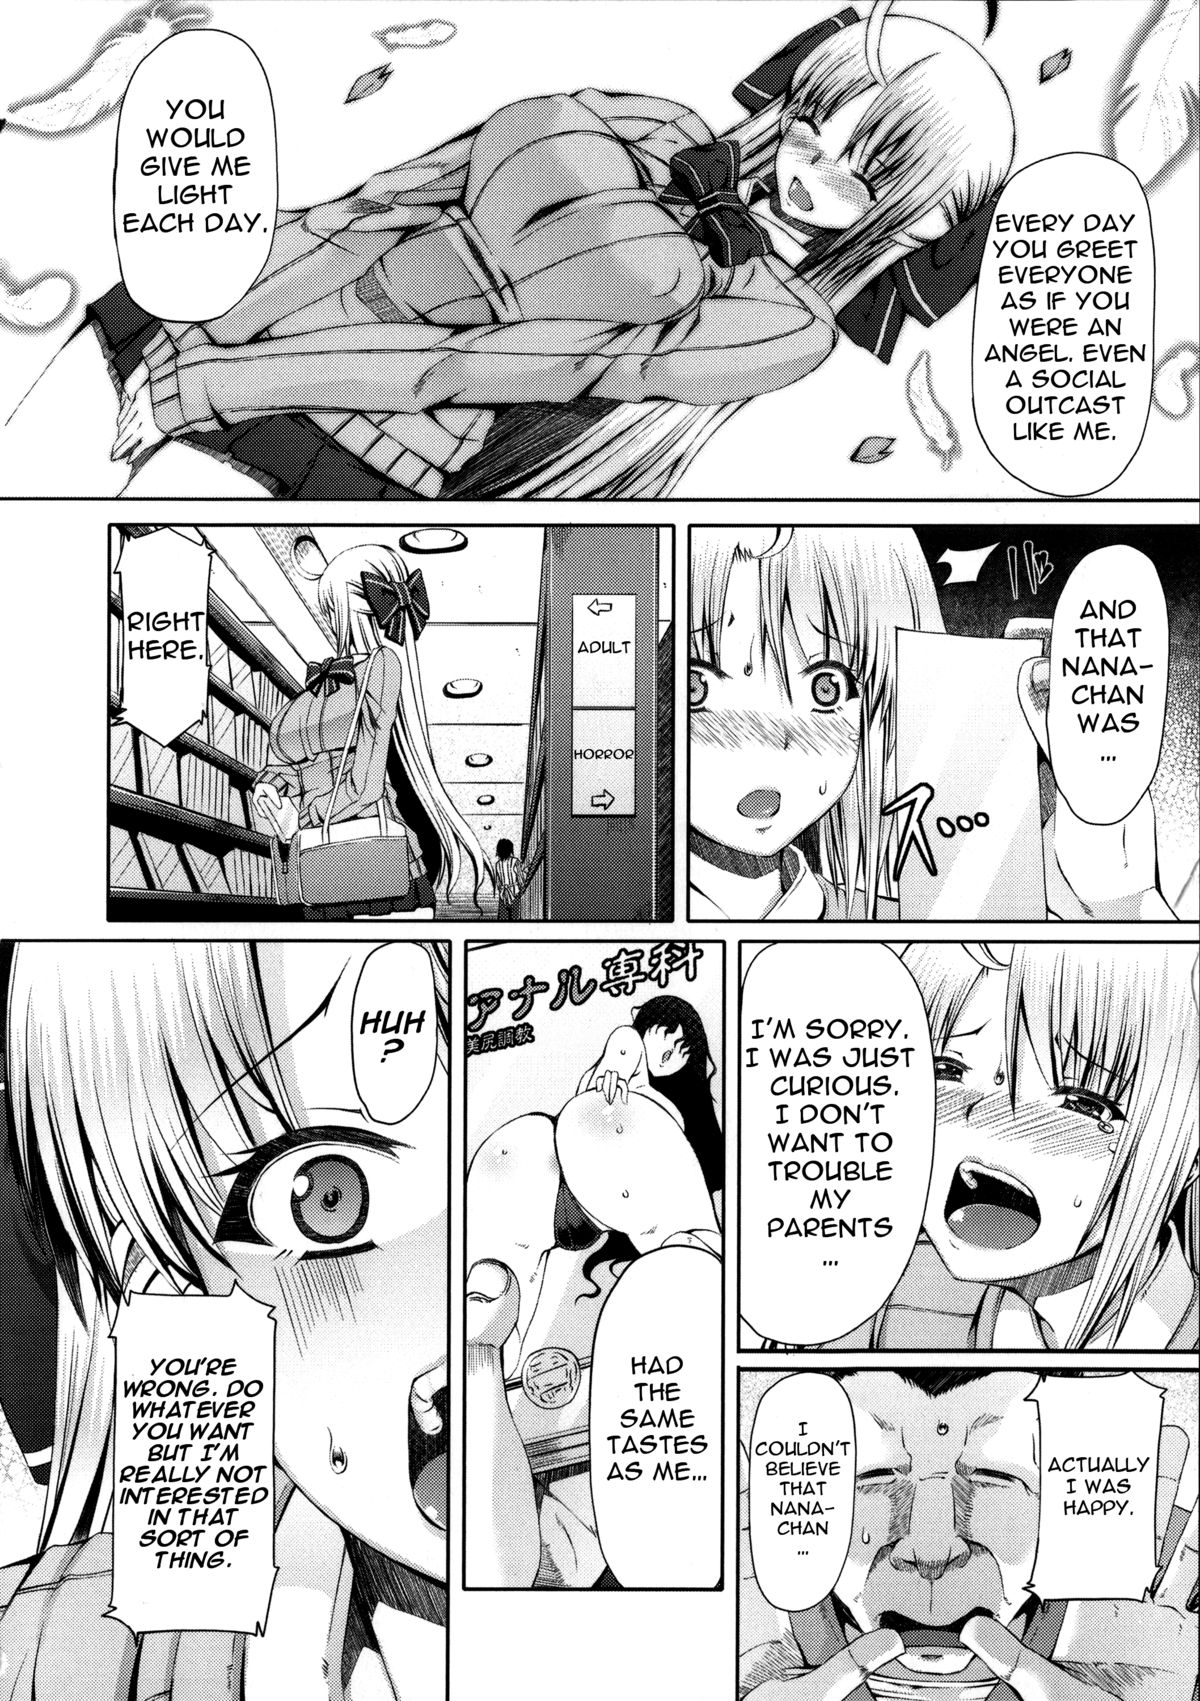 [RED-RUM] LOVE&PEACH Ch. 0-2 [English] {doujin-moe.us} page 33 full